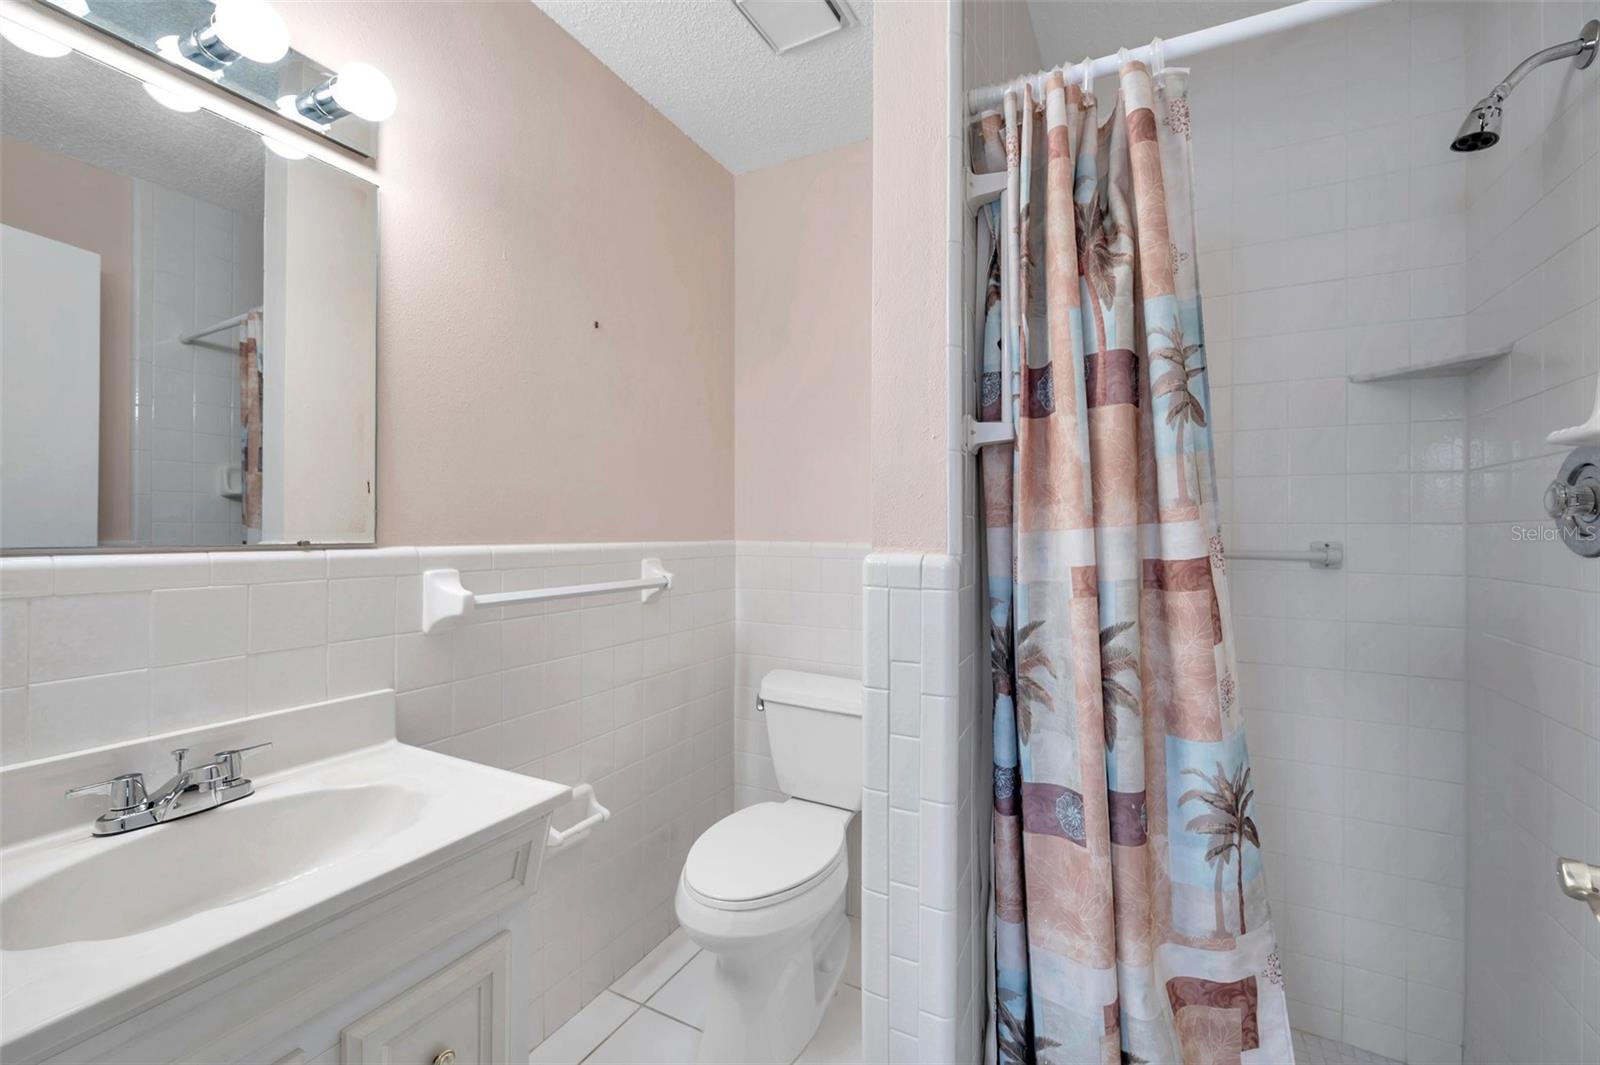 Primary bathroom has shower, no tub.  This bath was remodeled with newer vanity and commode.